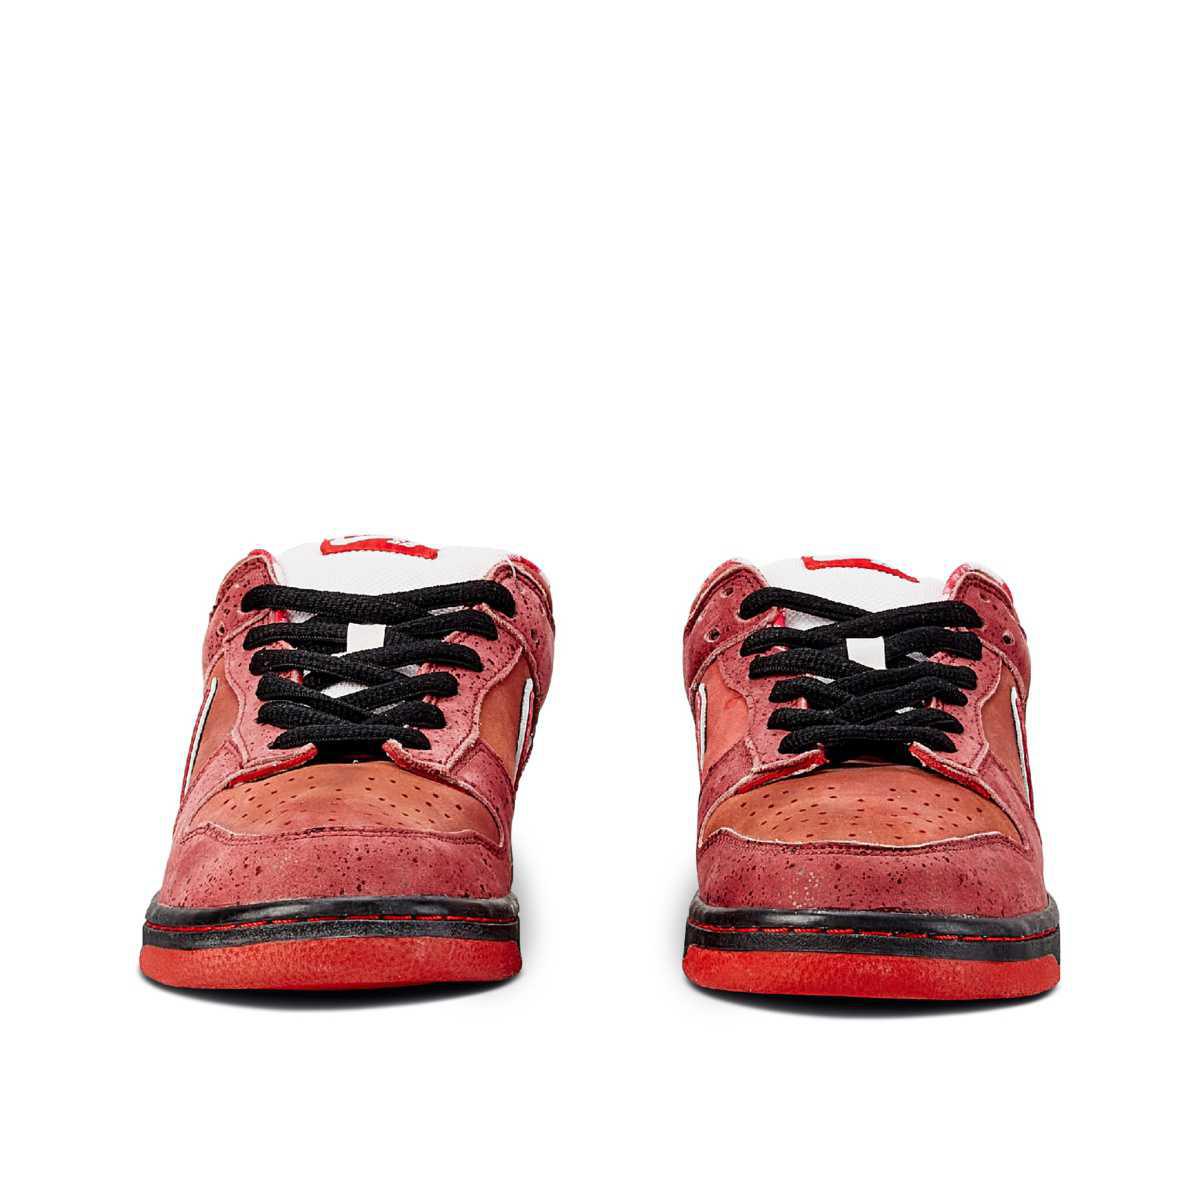 NIKE SB Dunk Low x CNCPTS Red Lobster